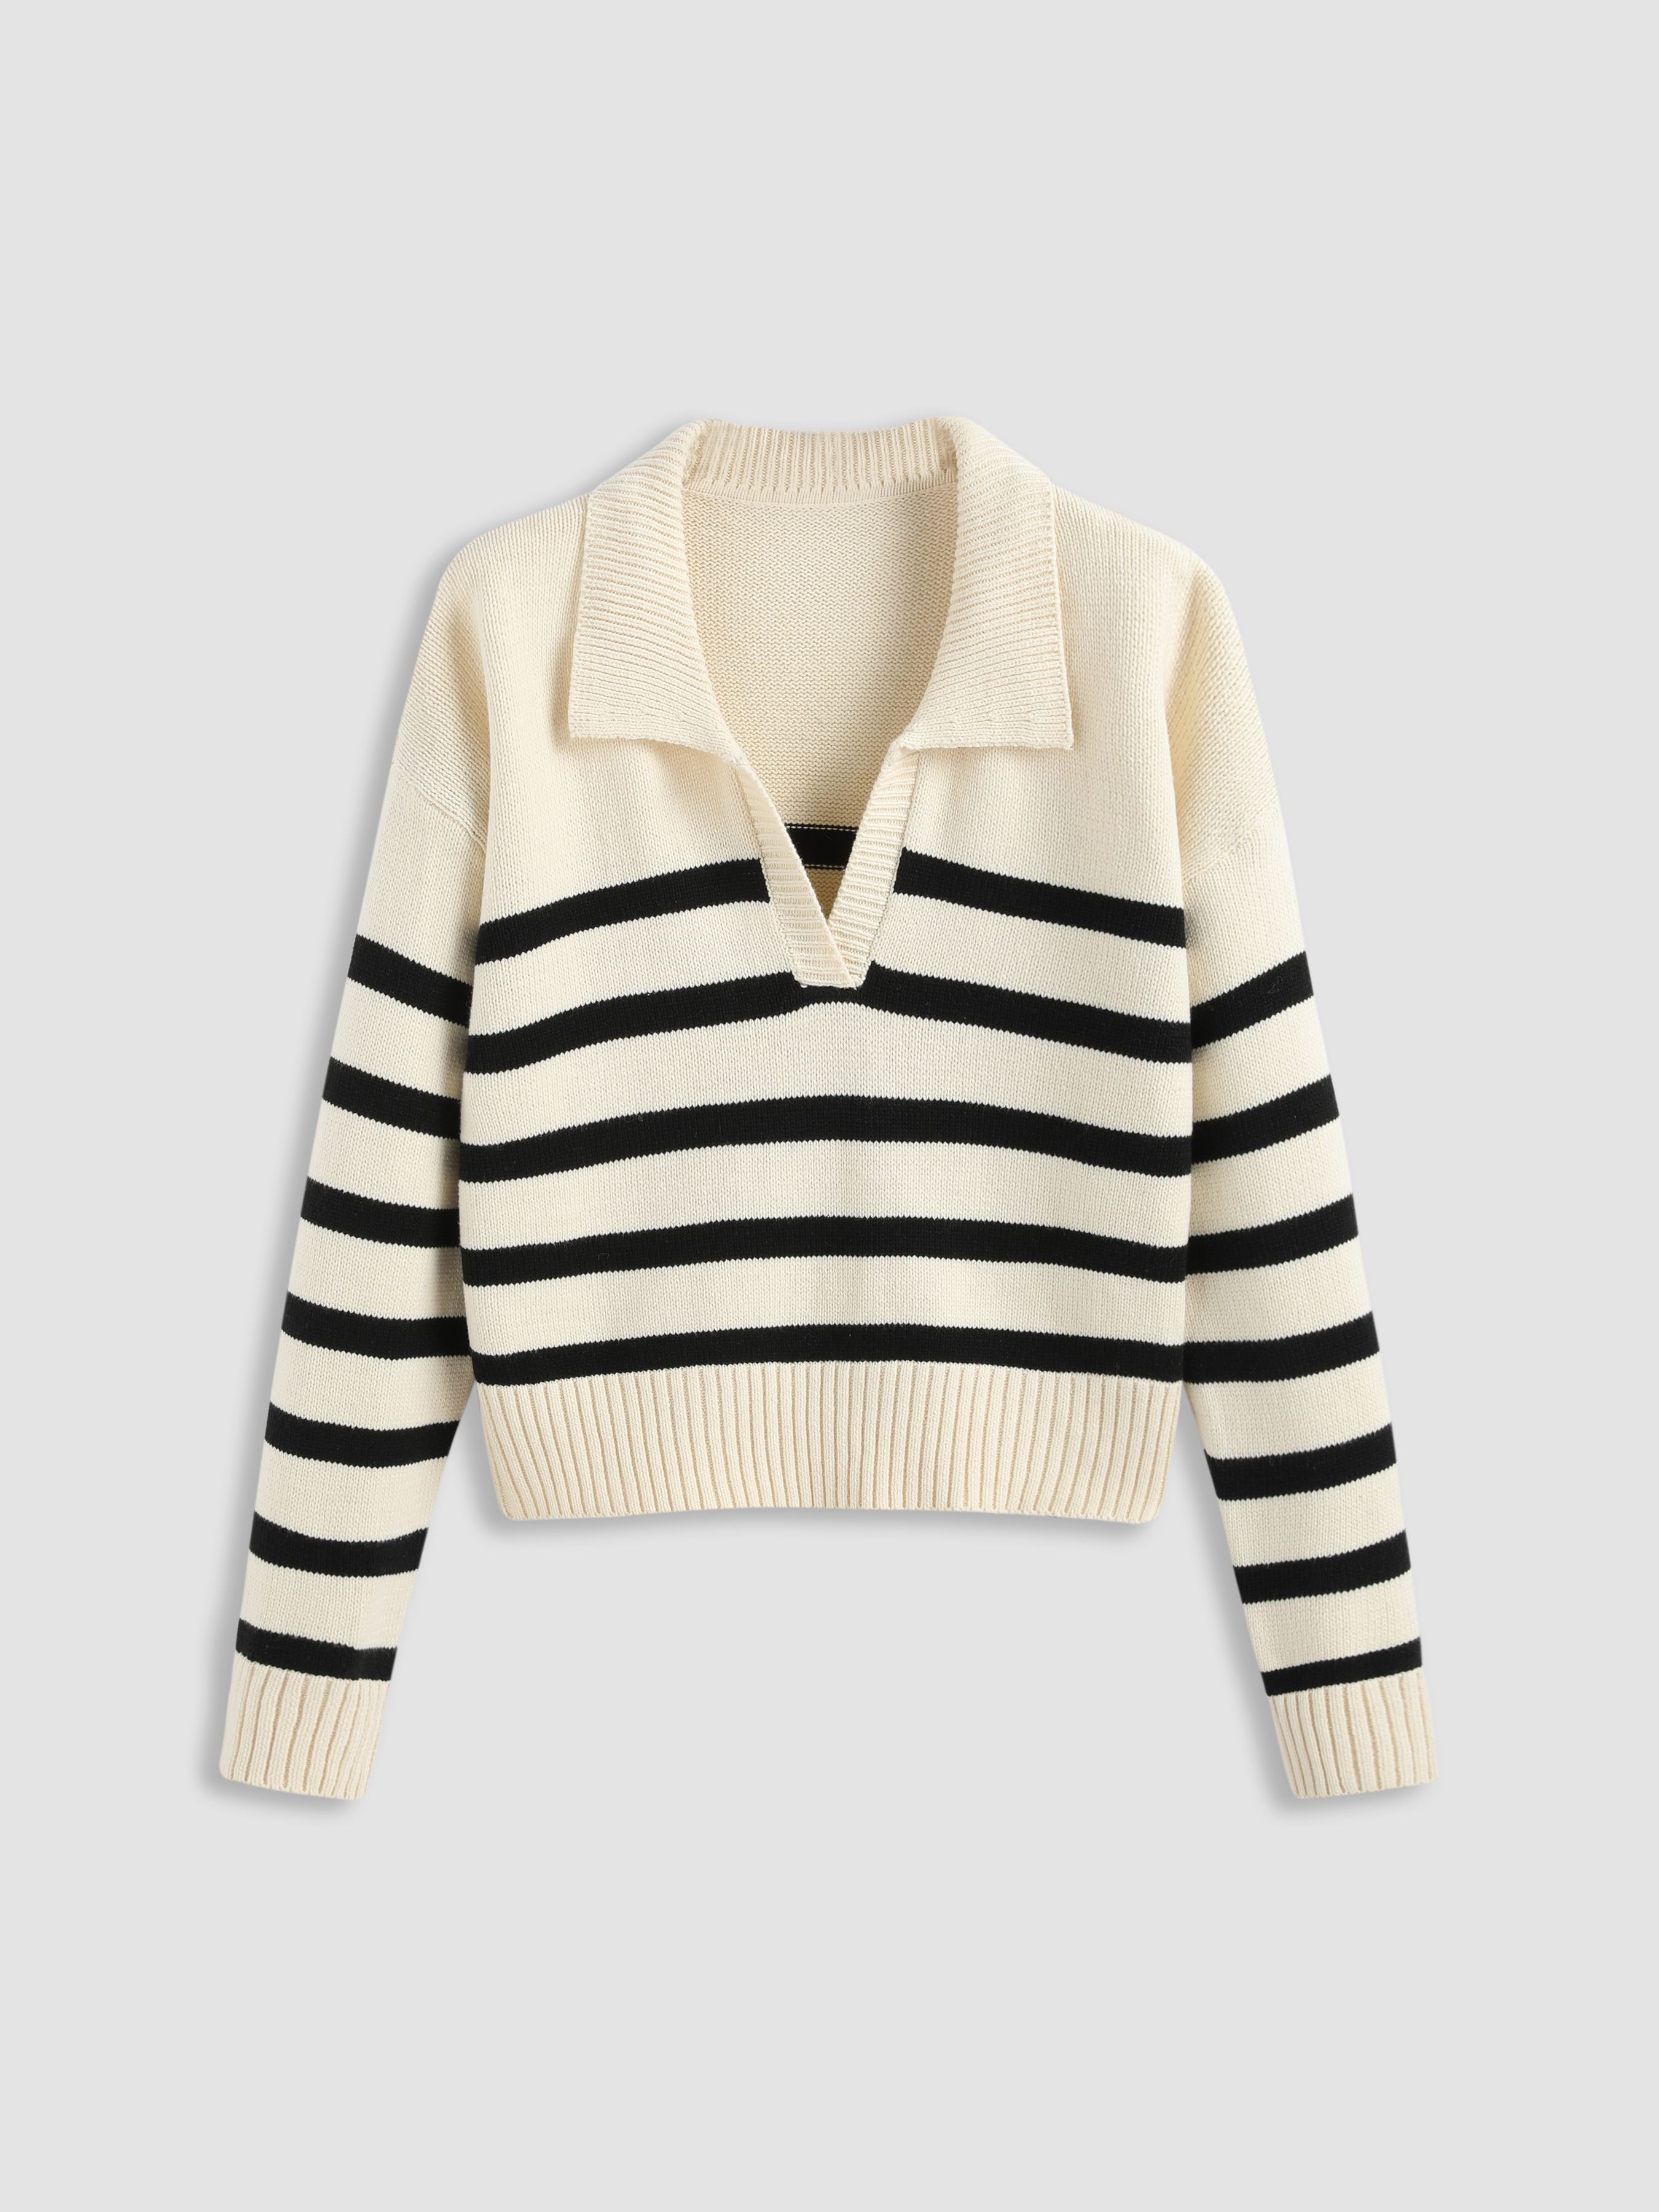 Striped Collar Knit Polo Top For School Daily Casual Date Exhibition Coffee Shop Home | Cider